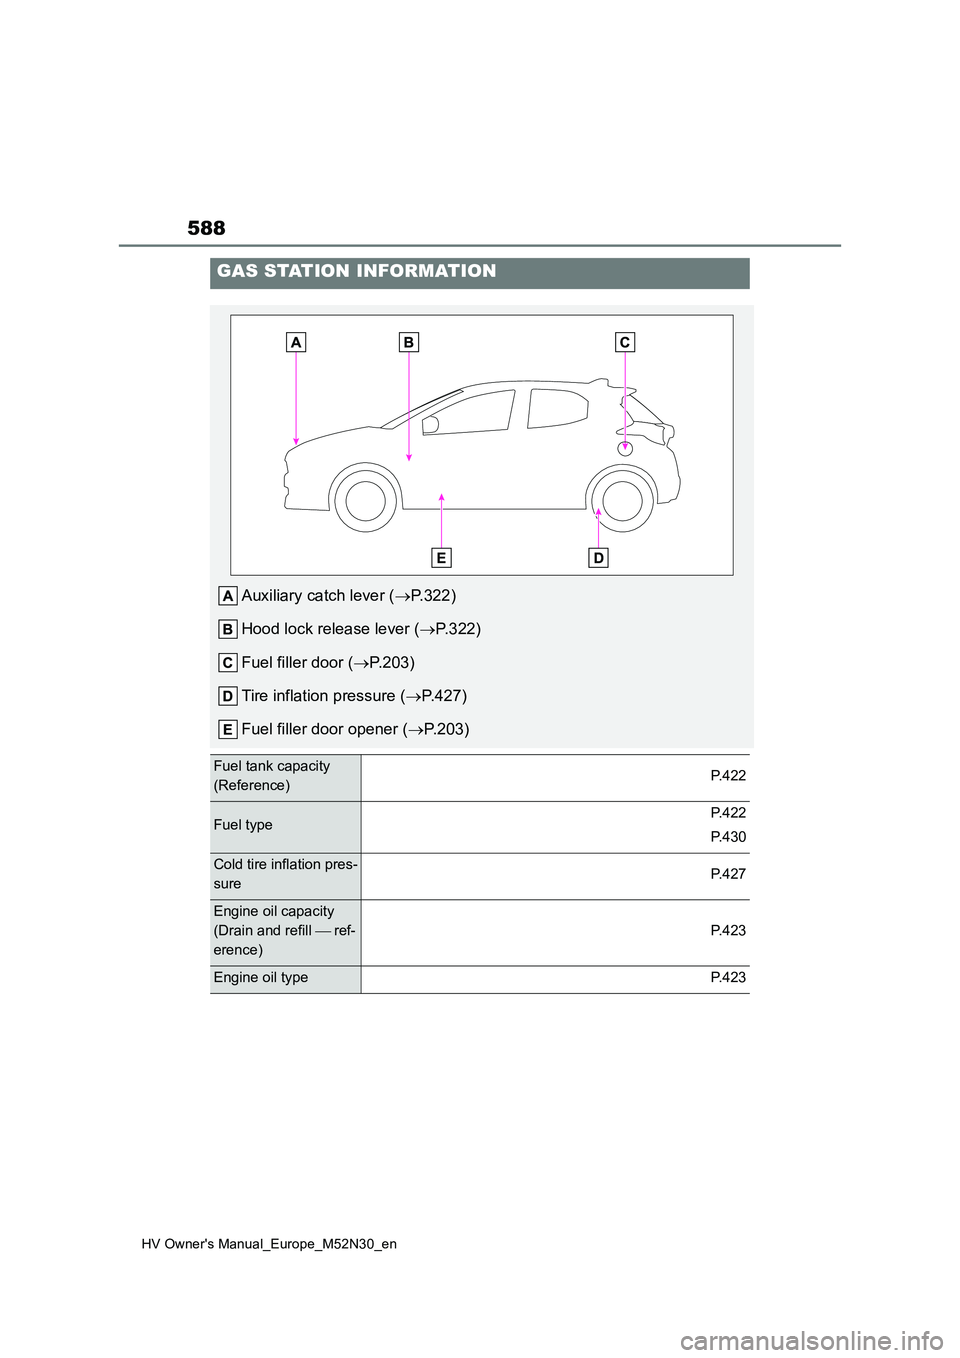 TOYOTA YARIS 2022  Owners Manual 588
HV Owner's Manual_Europe_M52N30_en
GAS STATION INFORMATION
Auxiliary catch lever (P.322) 
Hood lock release lever ( P.322) 
Fuel filler door ( P.203) 
Tire inflation pressure ( P.4